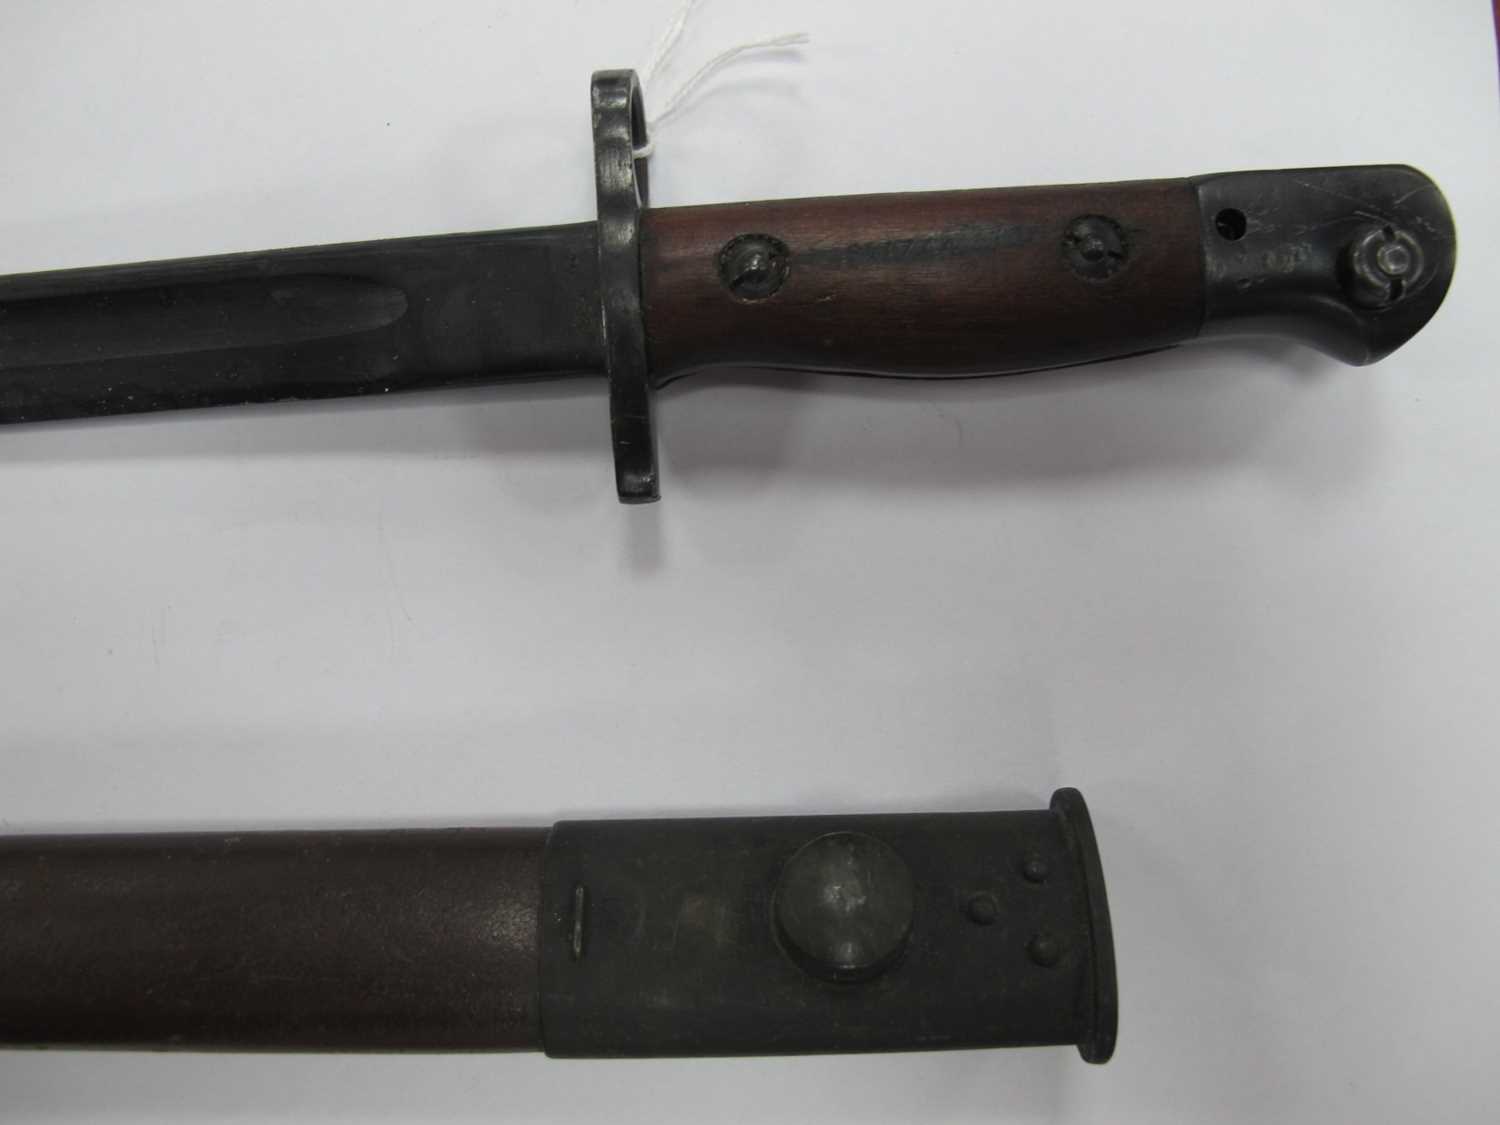 WWII Australian 1907 Pattern Short Bayonet, with various marks on blade including year '45', - Image 5 of 12